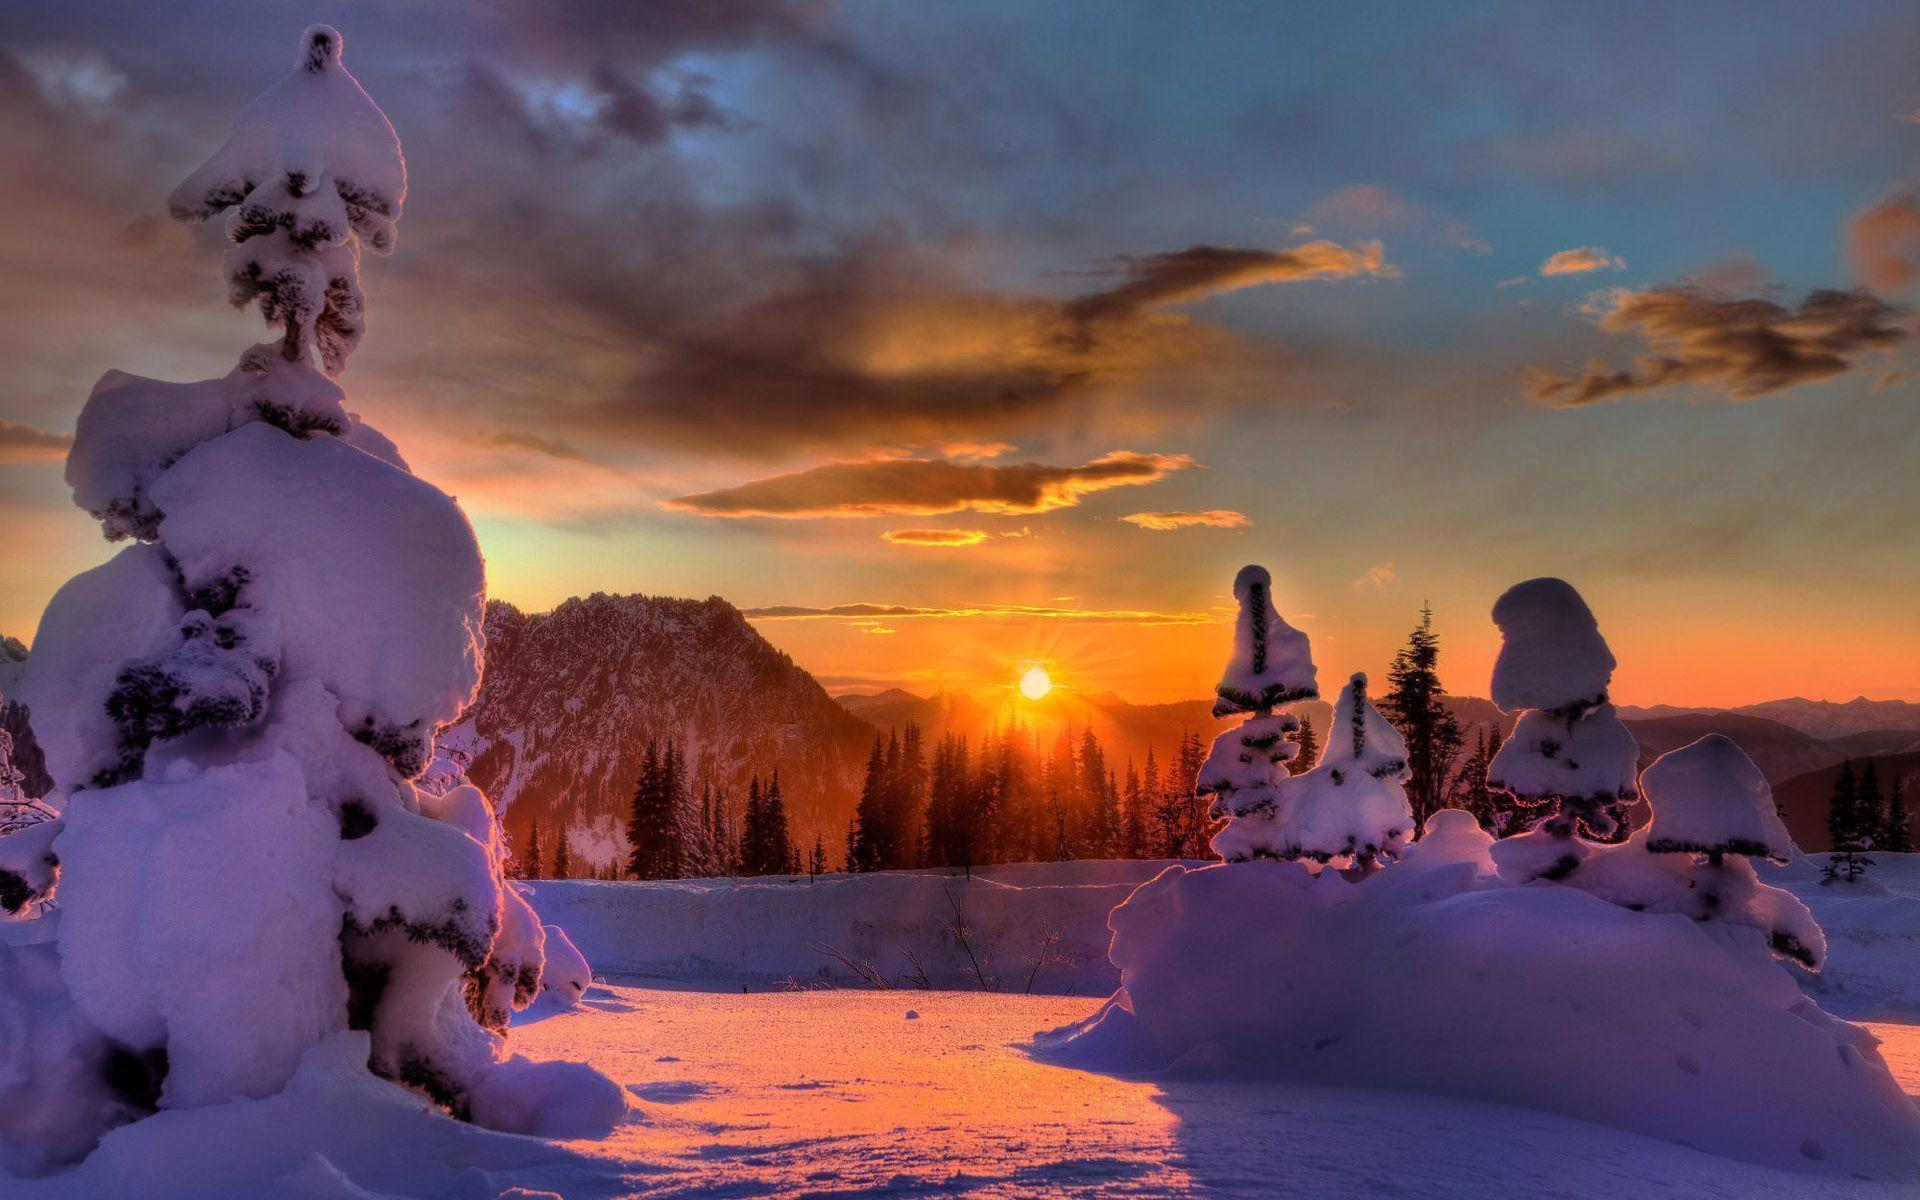 Winter sunset wallpaper and image, picture, photo